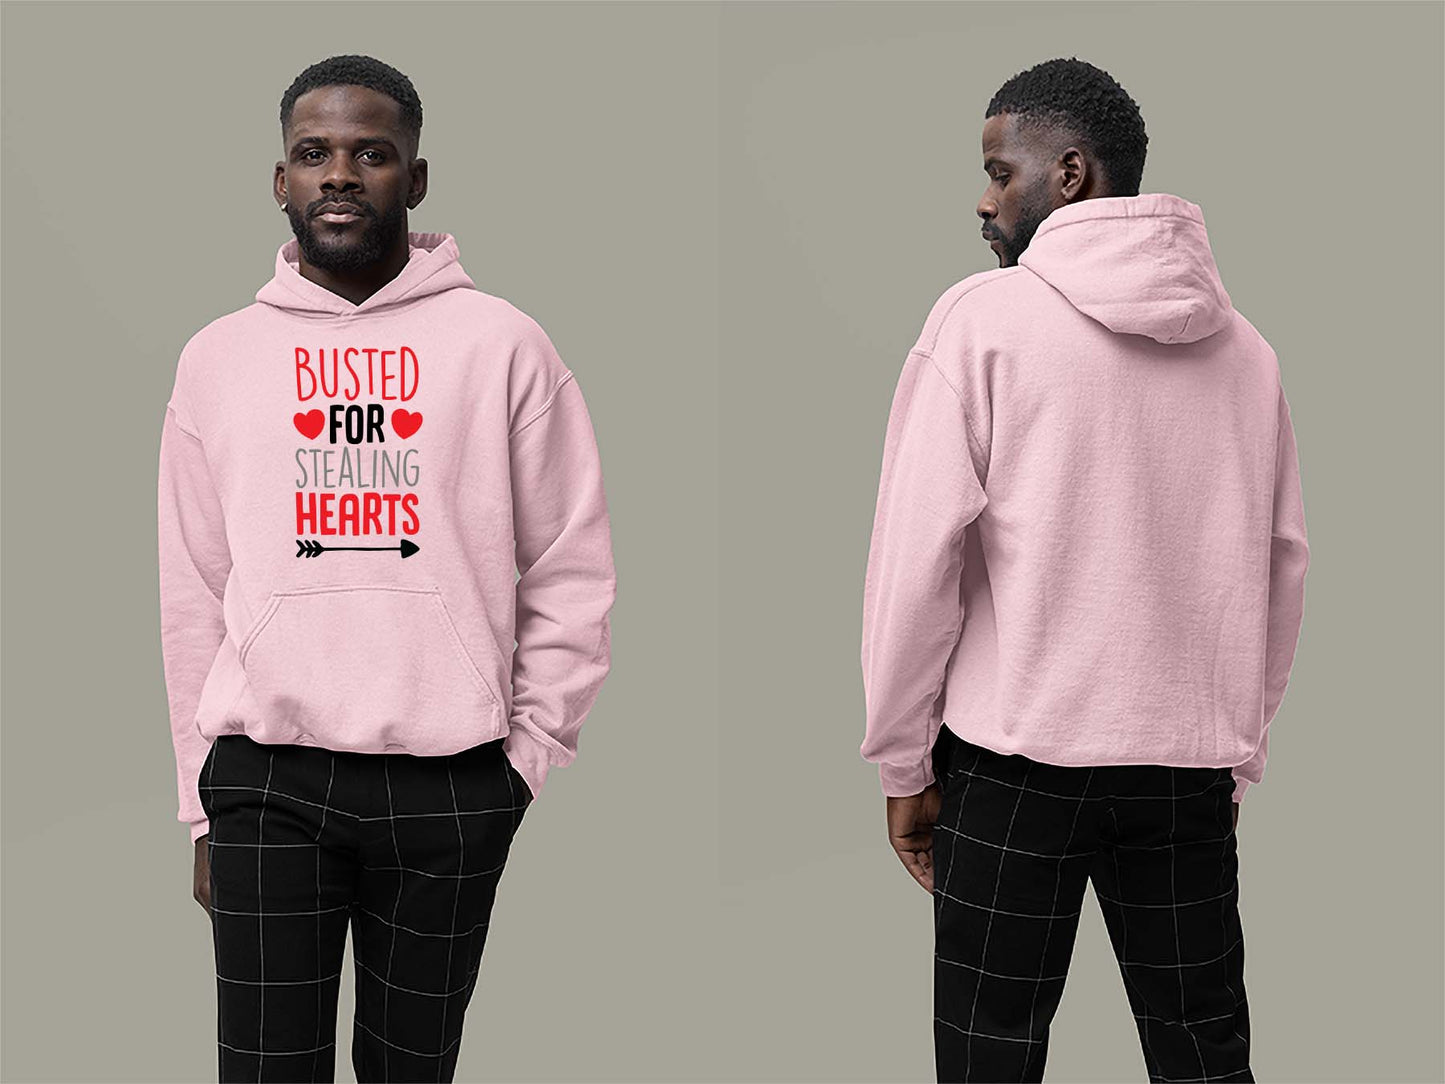 Fat Dave Busted For Stealing Hearts Hoodie Small Light Pink